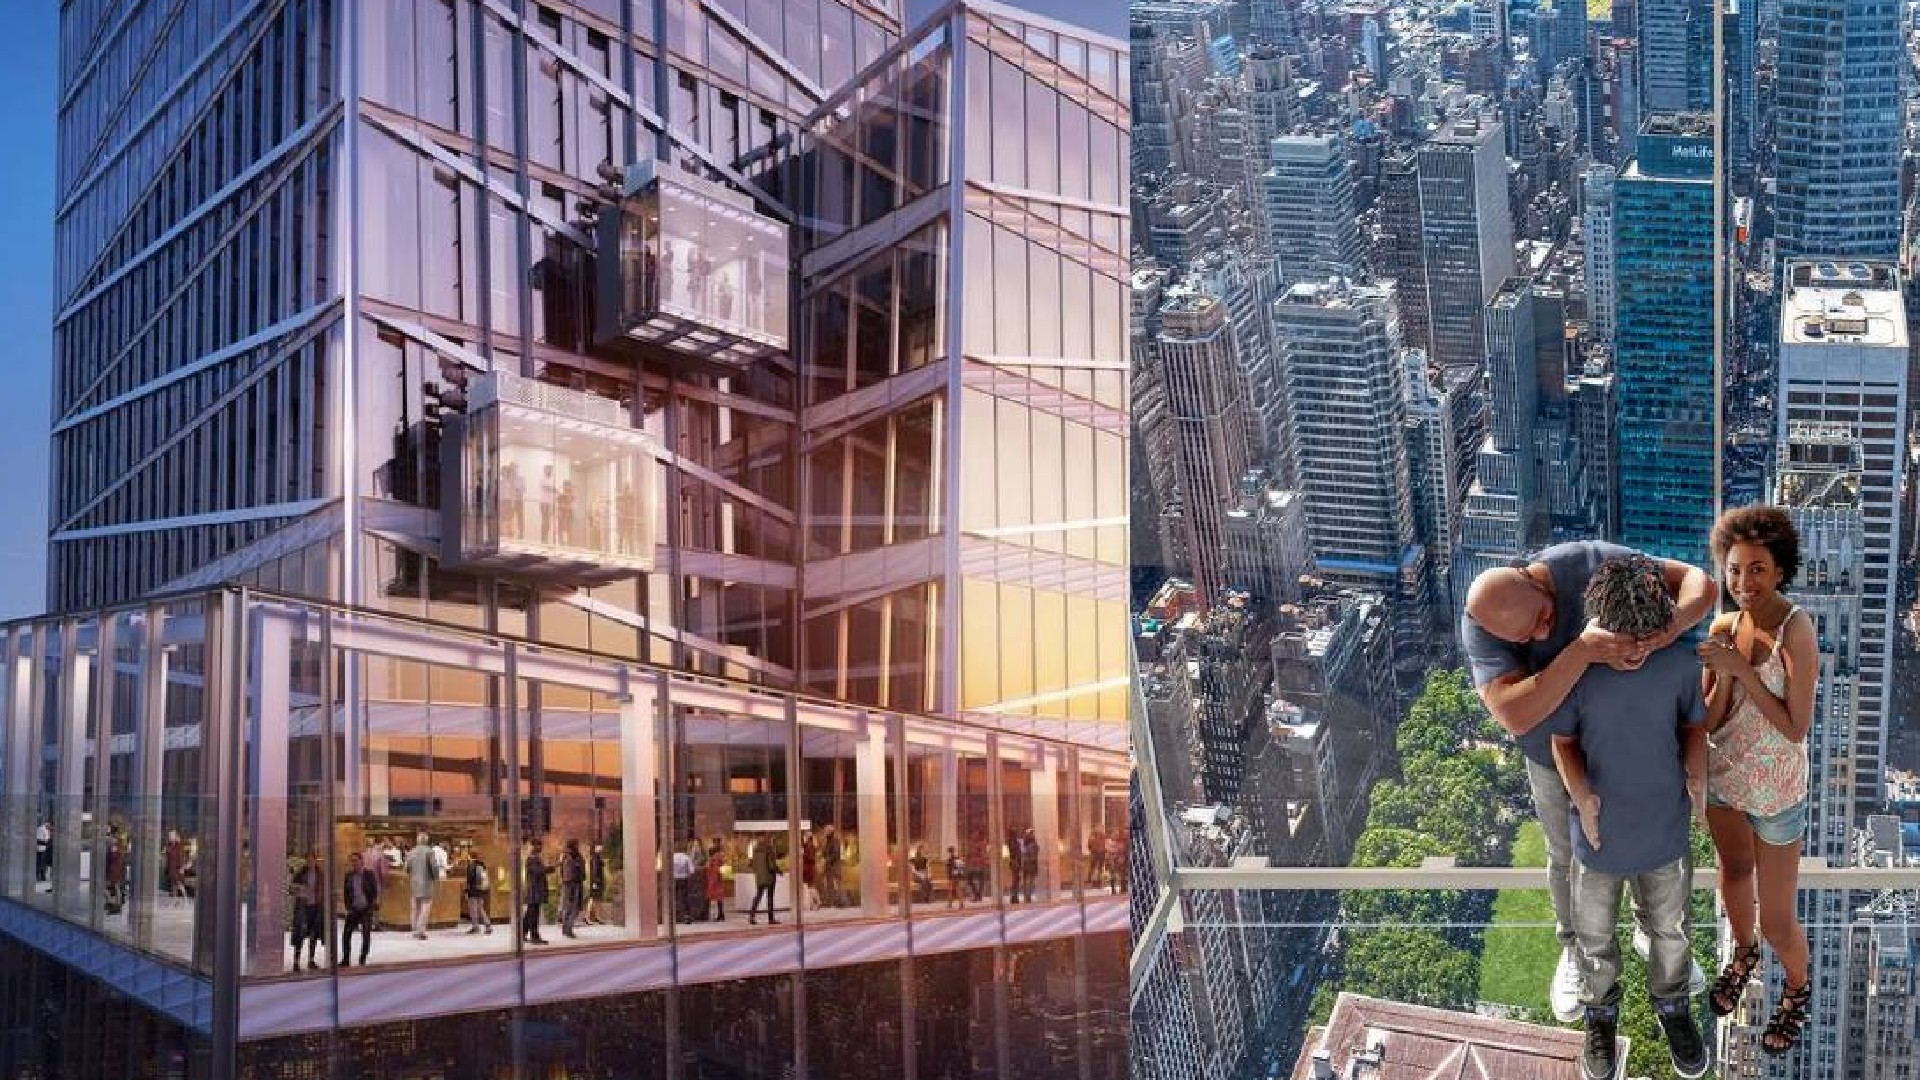 New York City Gets An All-Glass Elevator Giving Visitors A Heart-Stopping View 1,210Ft Above Manhattan